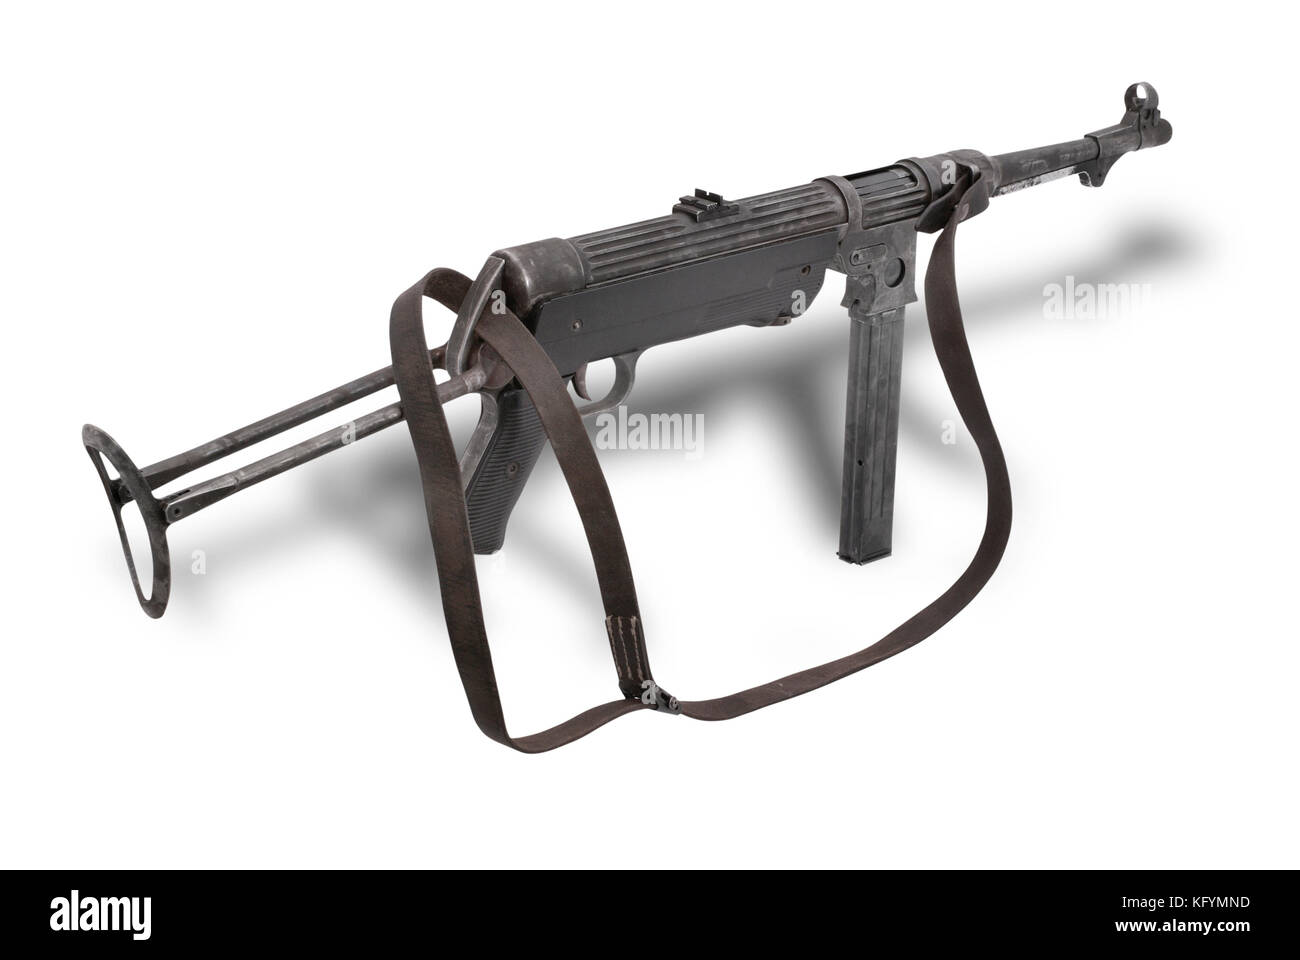 Germany at the WW2 German submachine gun MP38. The MP38 (40) (literally 'Machine Pistol 38') is a submachine gun developed in Germany and used extensi Stock Photo